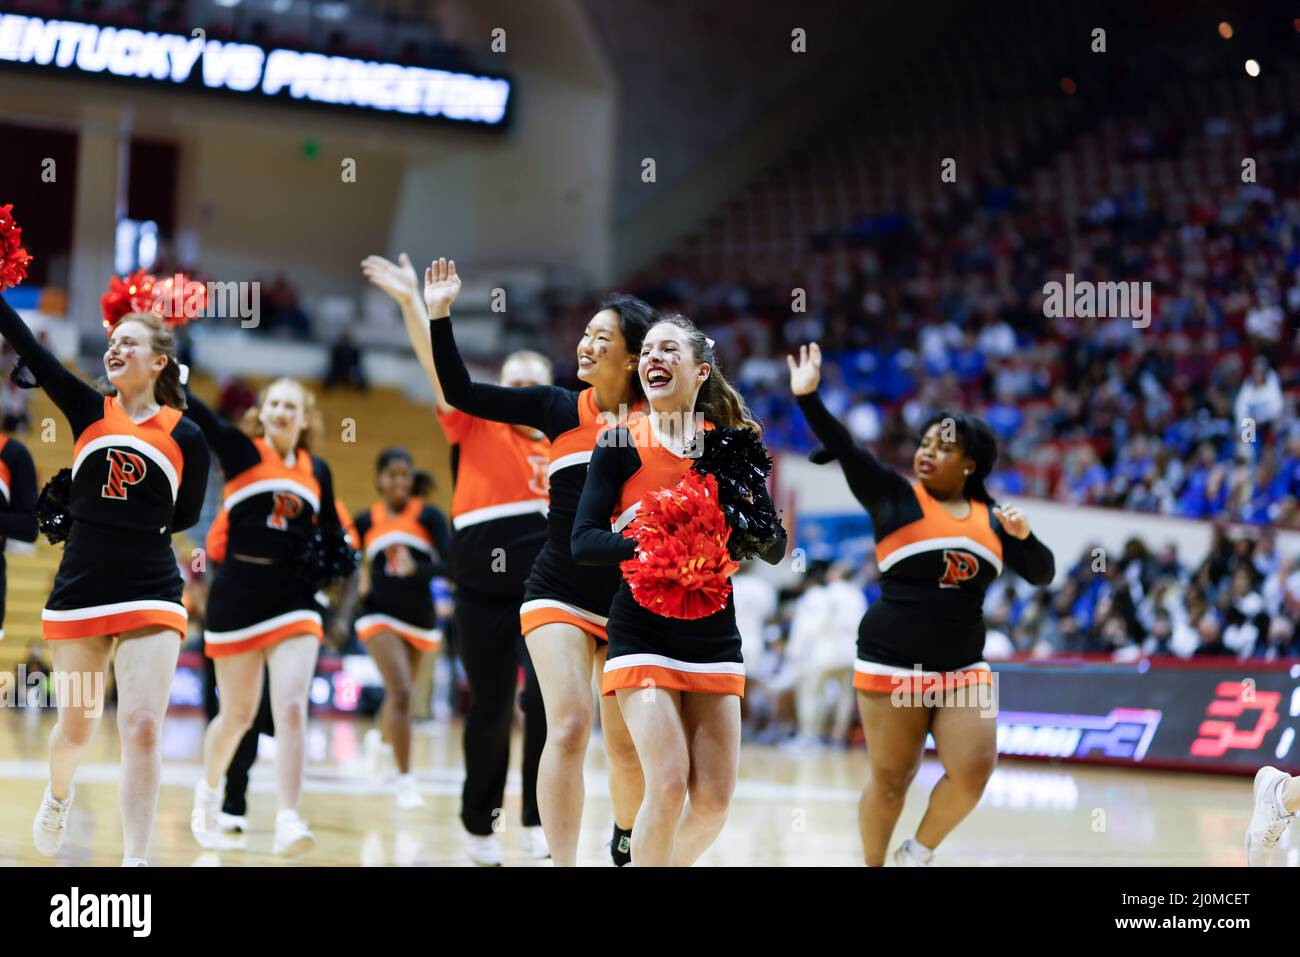 Bloomington, United States. 19th Mar, 2022. Princeton cheerleaders cheer against Kentucky during round 1 of the NCAA 2022 Division 1 Women's Basketball Championship, at Simon Skjodt Assembly Hall in Bloomington. Princeton beat Kentucky 69-62. (Photo by Jeremy Hogan/SOPA Images/Sipa USA) Credit: Sipa USA/Alamy Live News Stock Photo